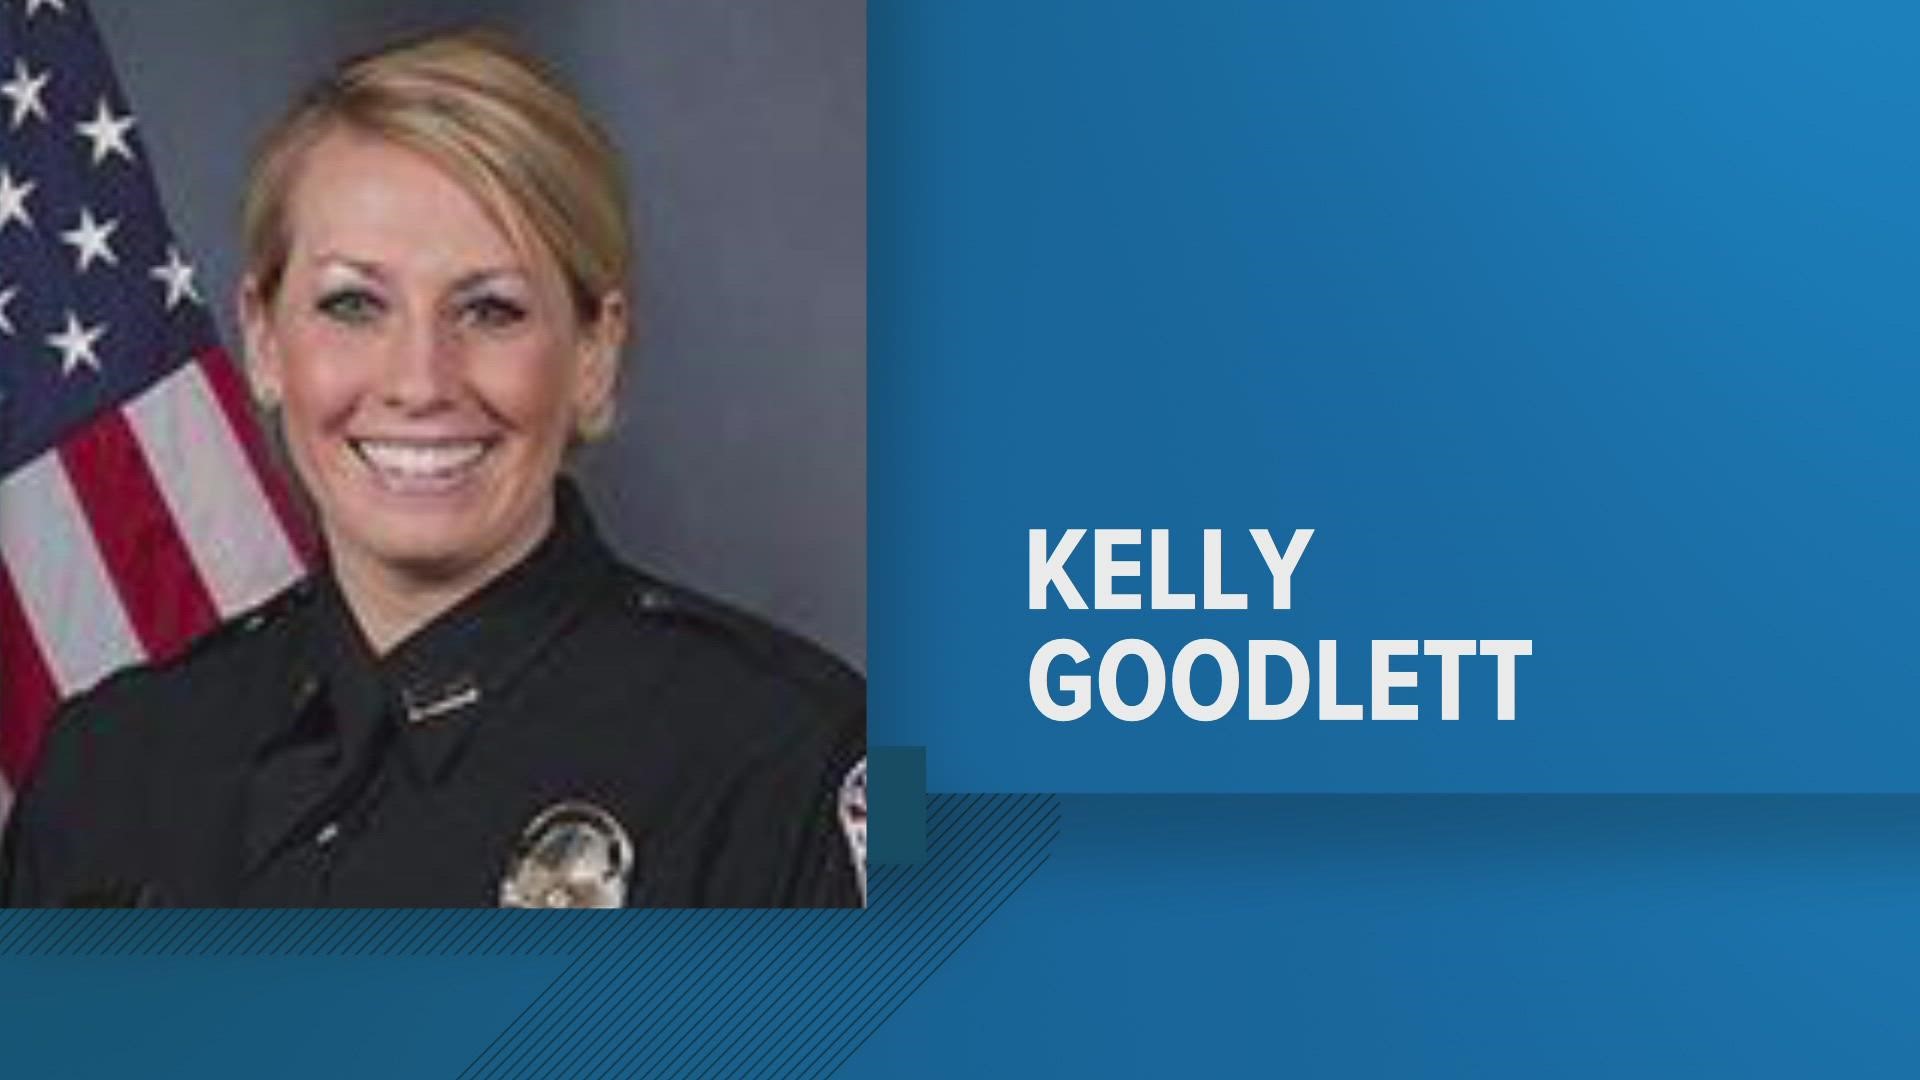 Chelsey Napper and Cody Etherton filed the lawsuit against Kelly Goodlett after she pleaded guilty to a federal conspiracy charge.